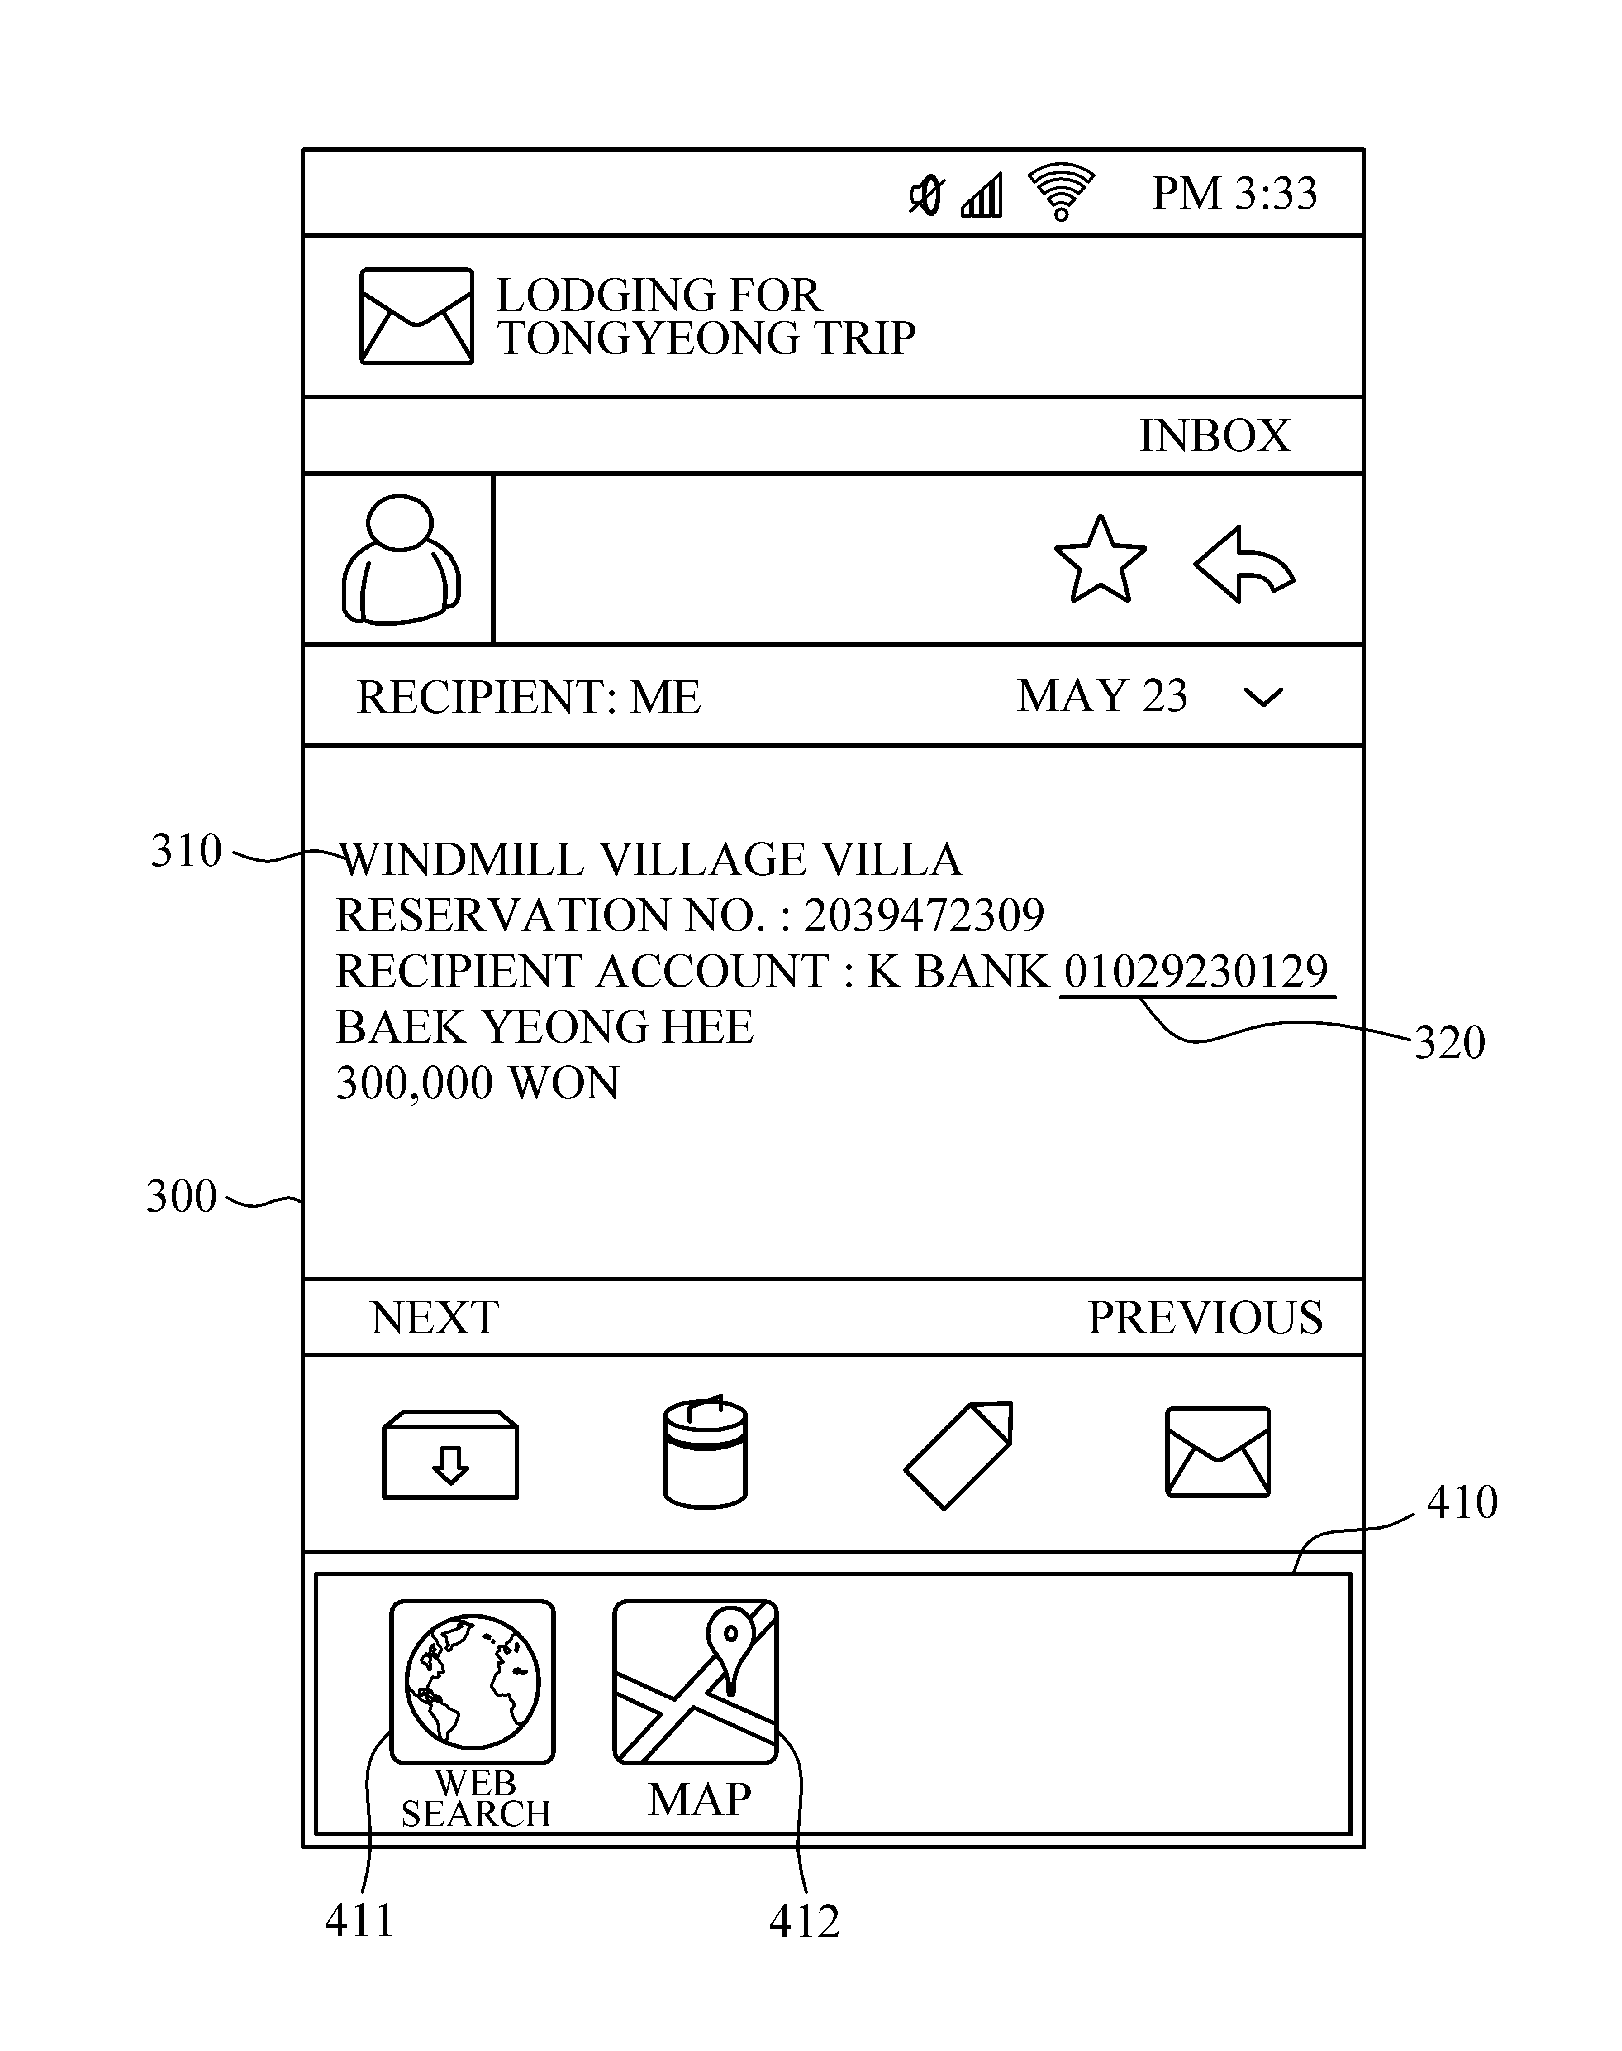 Apparatus and method for executing application